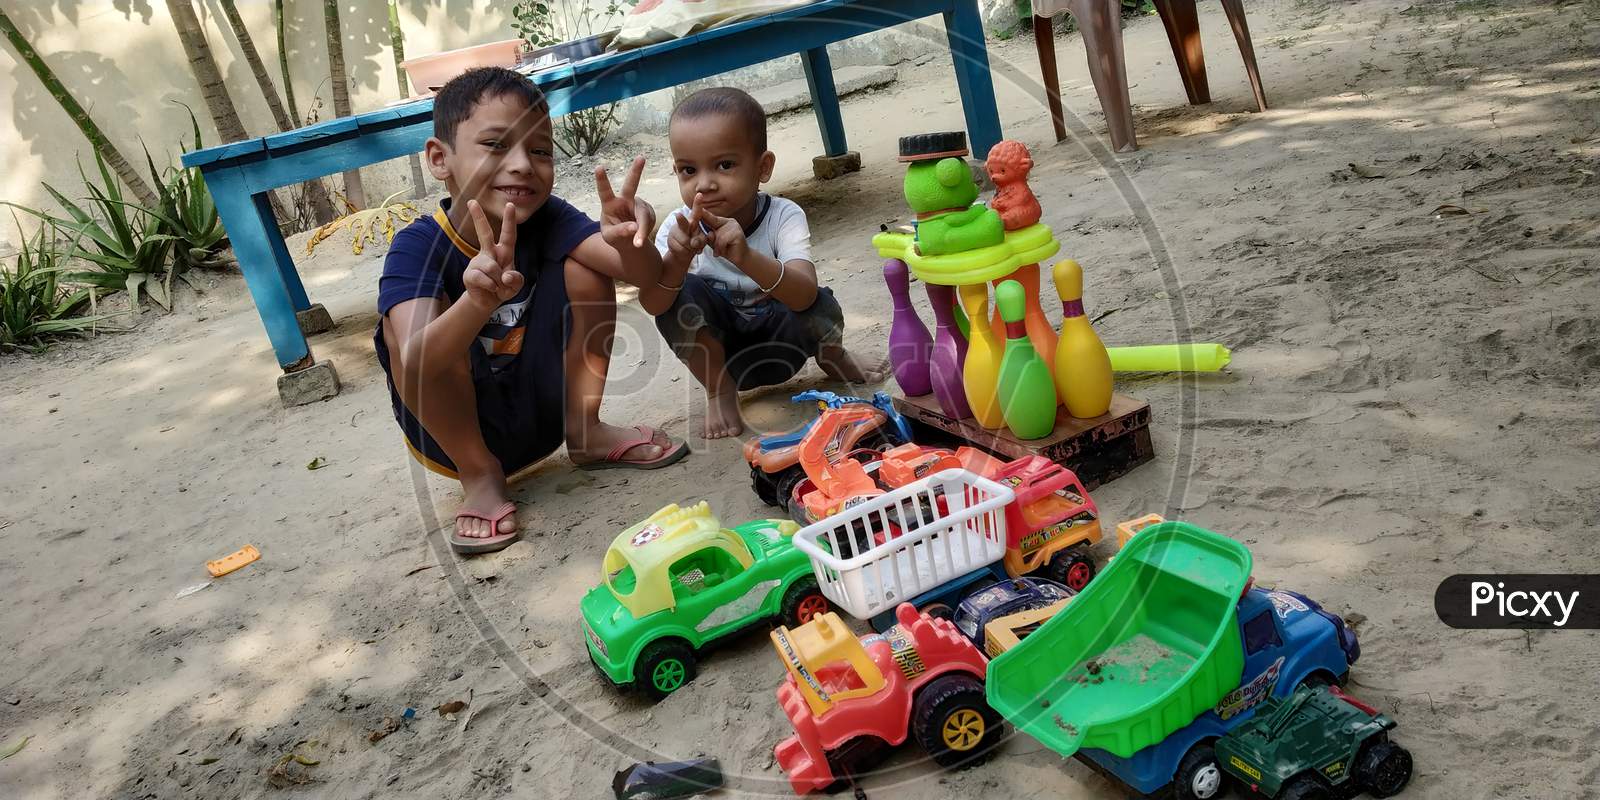 Two little kids playing and enjoying with toys